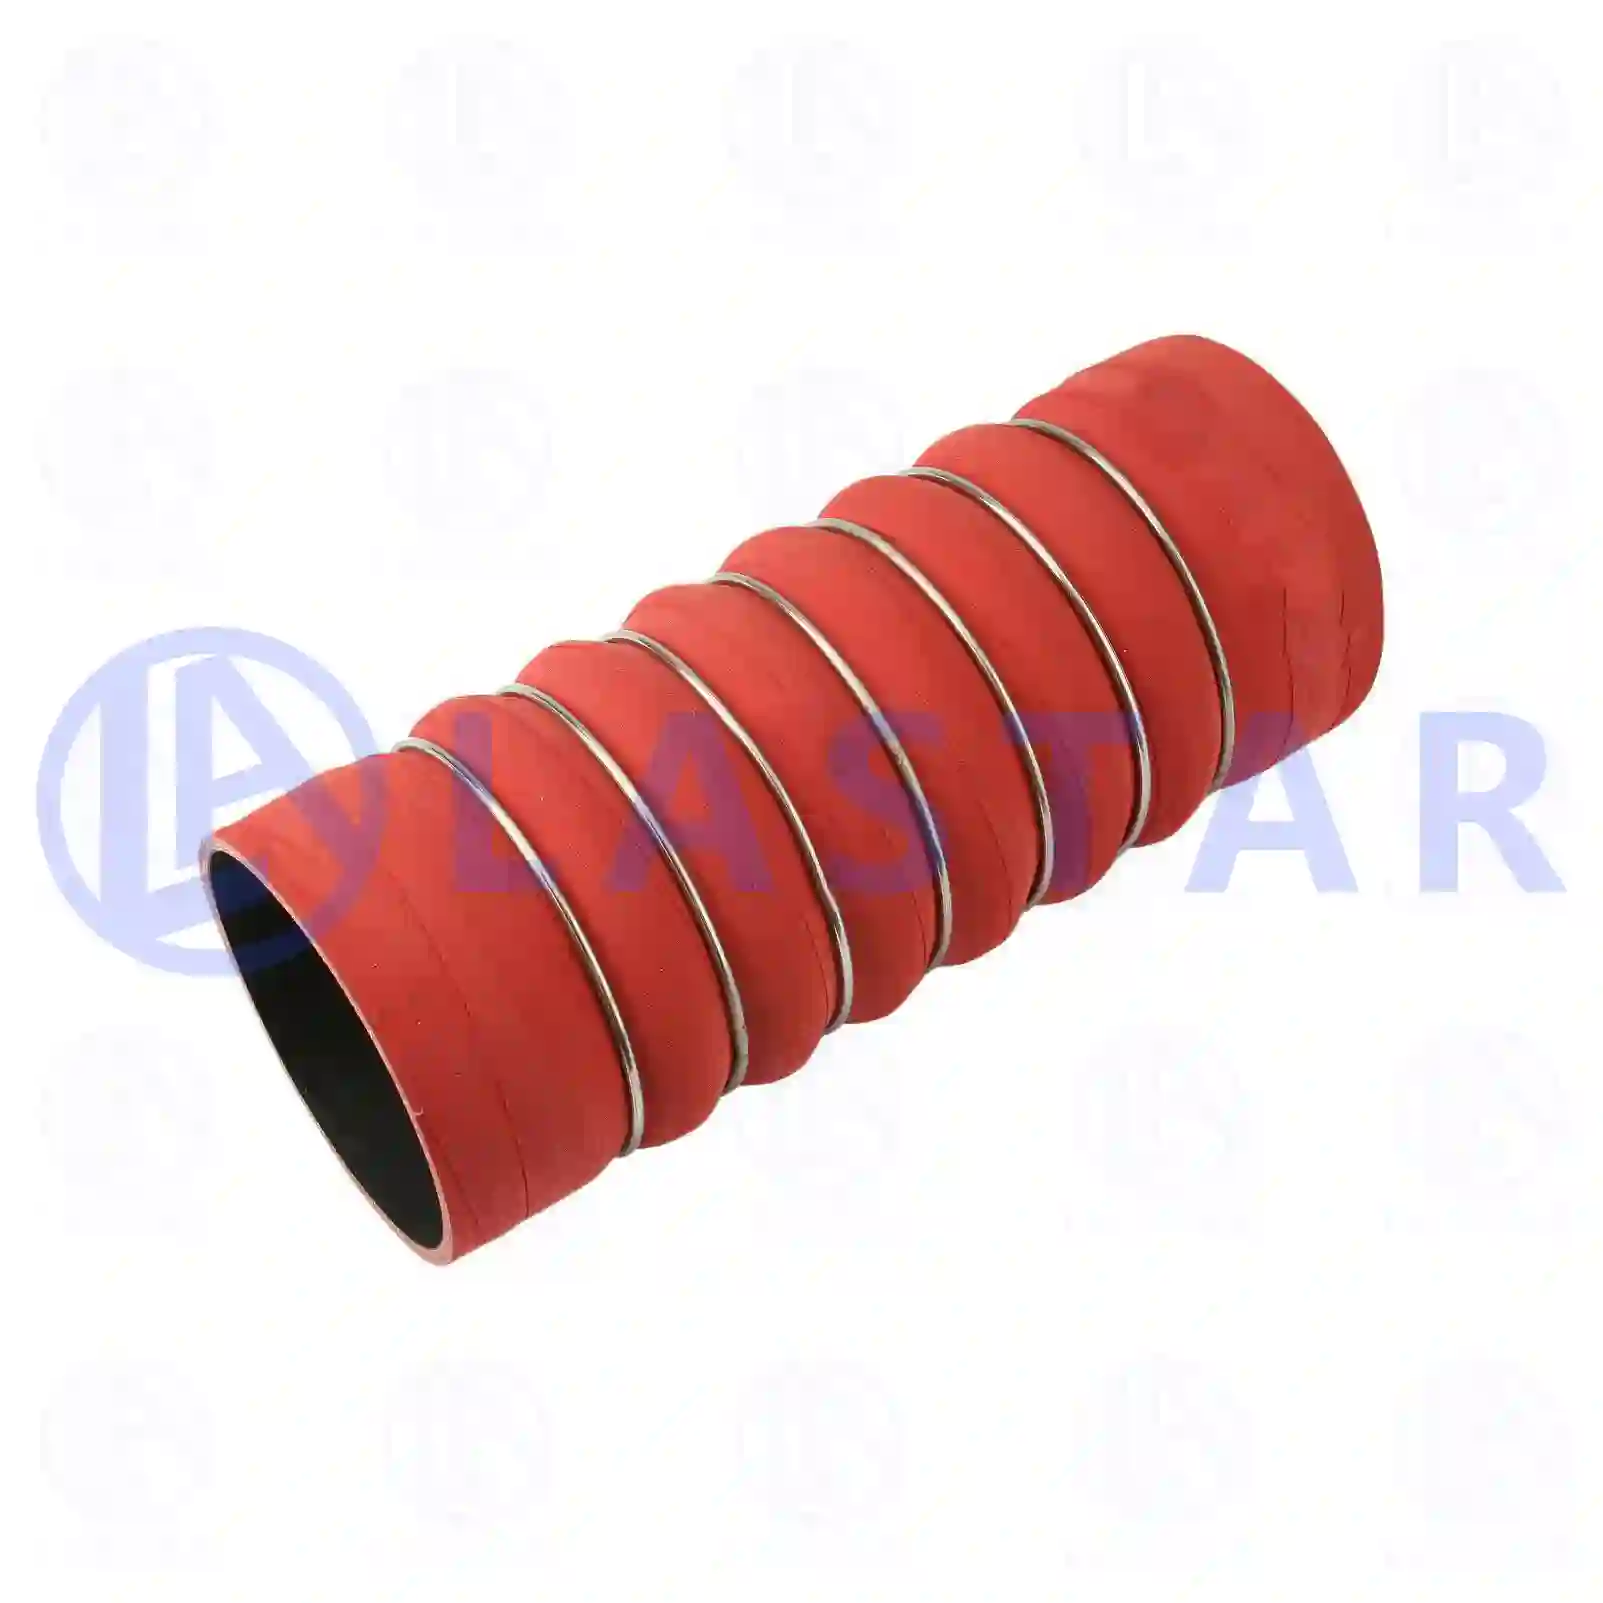 Charge air hose, 77708231, 0010947882, 0020942082, 0020945082, 0020945282, 0020945982, 0020947682 ||  77708231 Lastar Spare Part | Truck Spare Parts, Auotomotive Spare Parts Charge air hose, 77708231, 0010947882, 0020942082, 0020945082, 0020945282, 0020945982, 0020947682 ||  77708231 Lastar Spare Part | Truck Spare Parts, Auotomotive Spare Parts